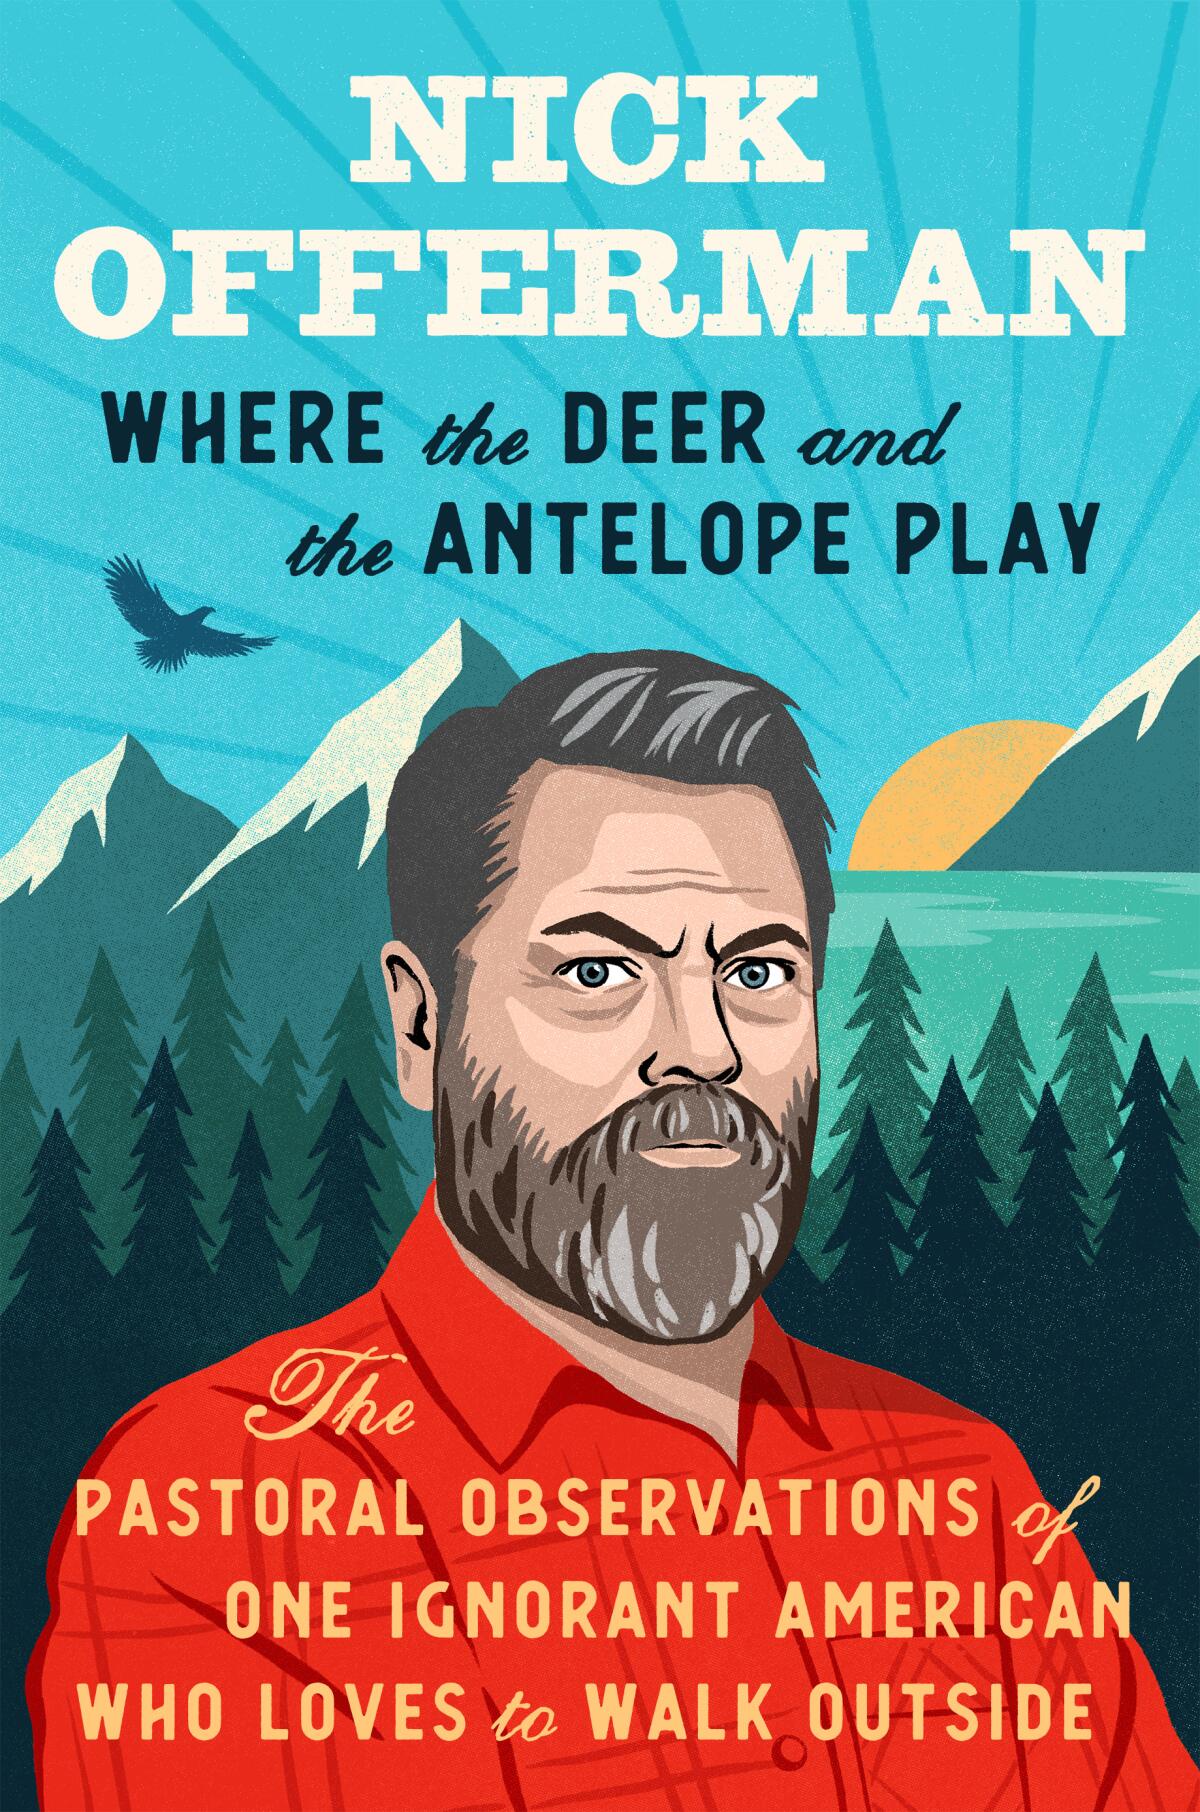 Book by Nick Offerman